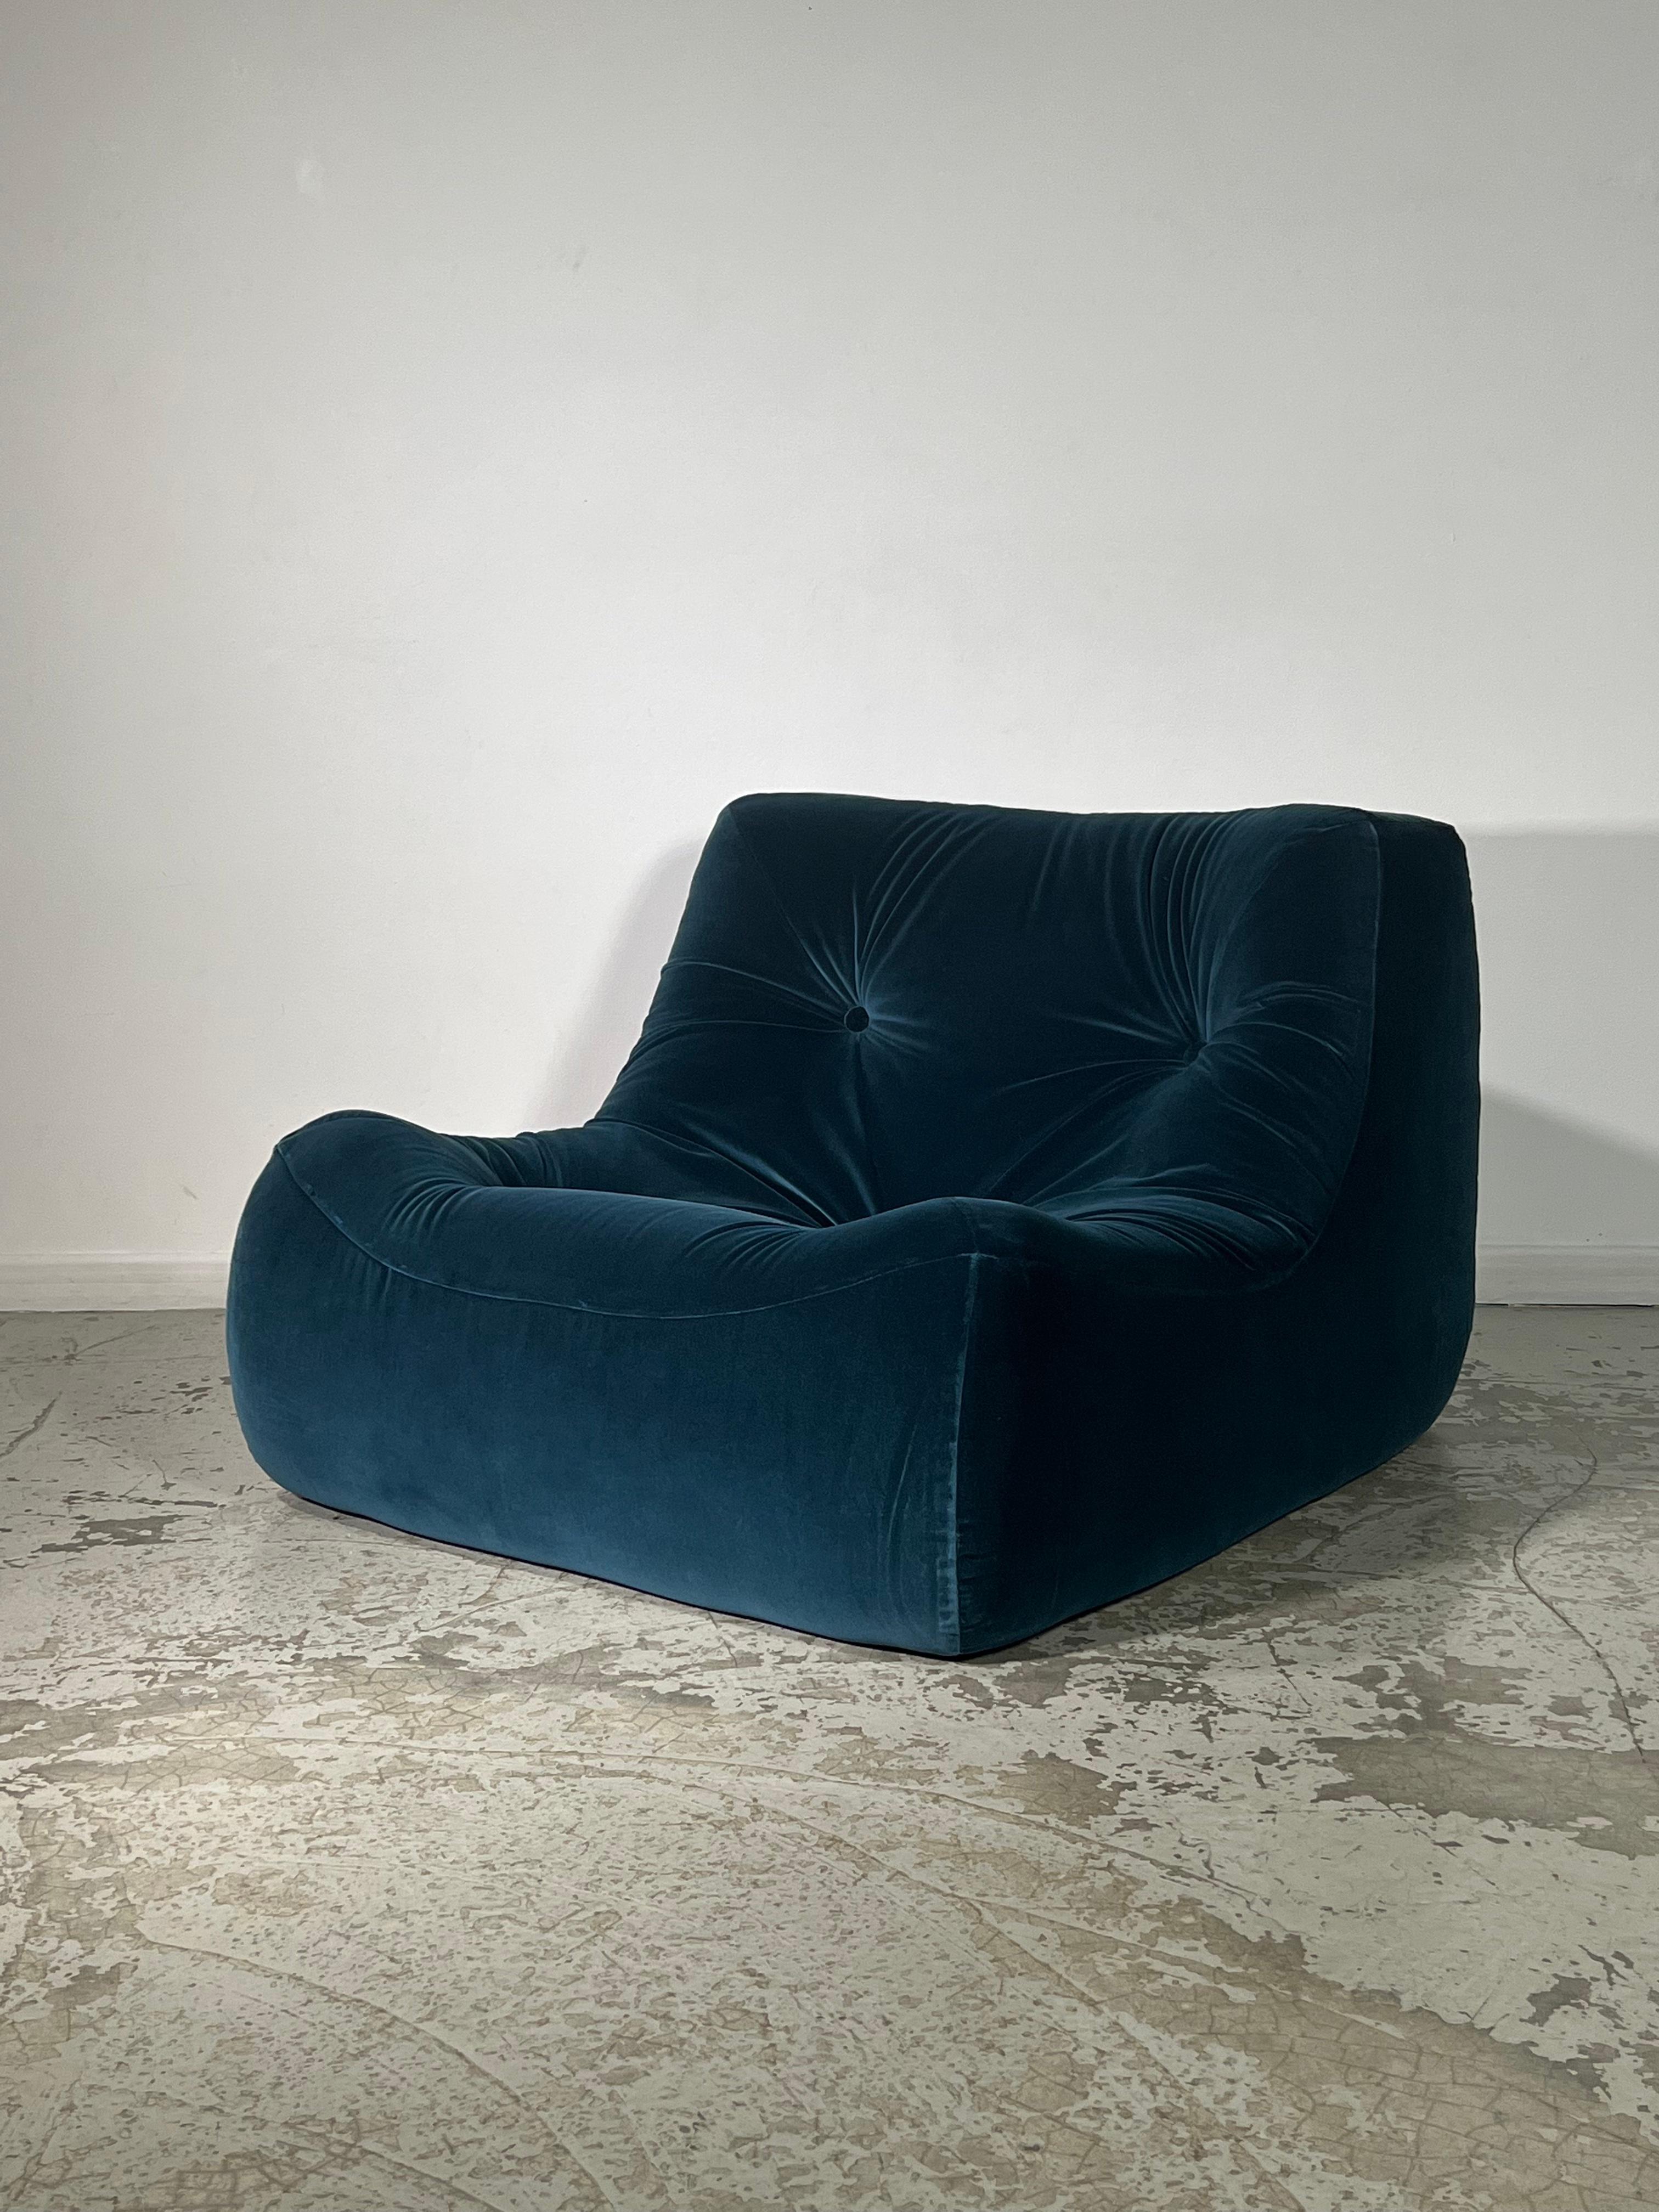 This arm chair was designed by Michel Ducaroy for Ligne Roset in the 80’s. He devoted twenty six year of his life, at the head of the design department. Ducaroy proposed few declinations : two or three seat sofa, angle sofa and ottoman. It follow